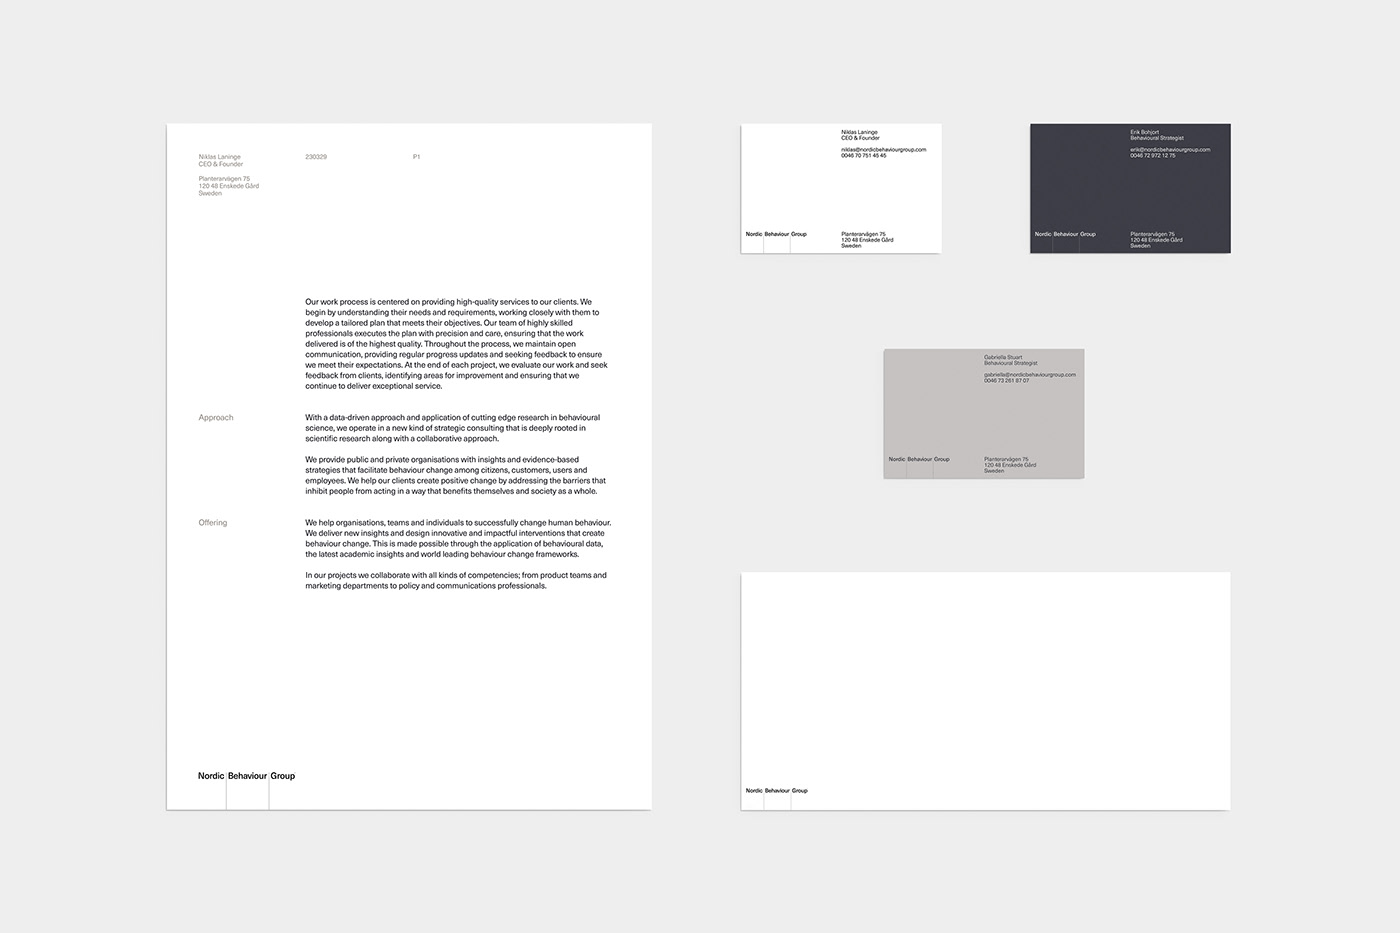 Branding and visual identity artifact from NBG project